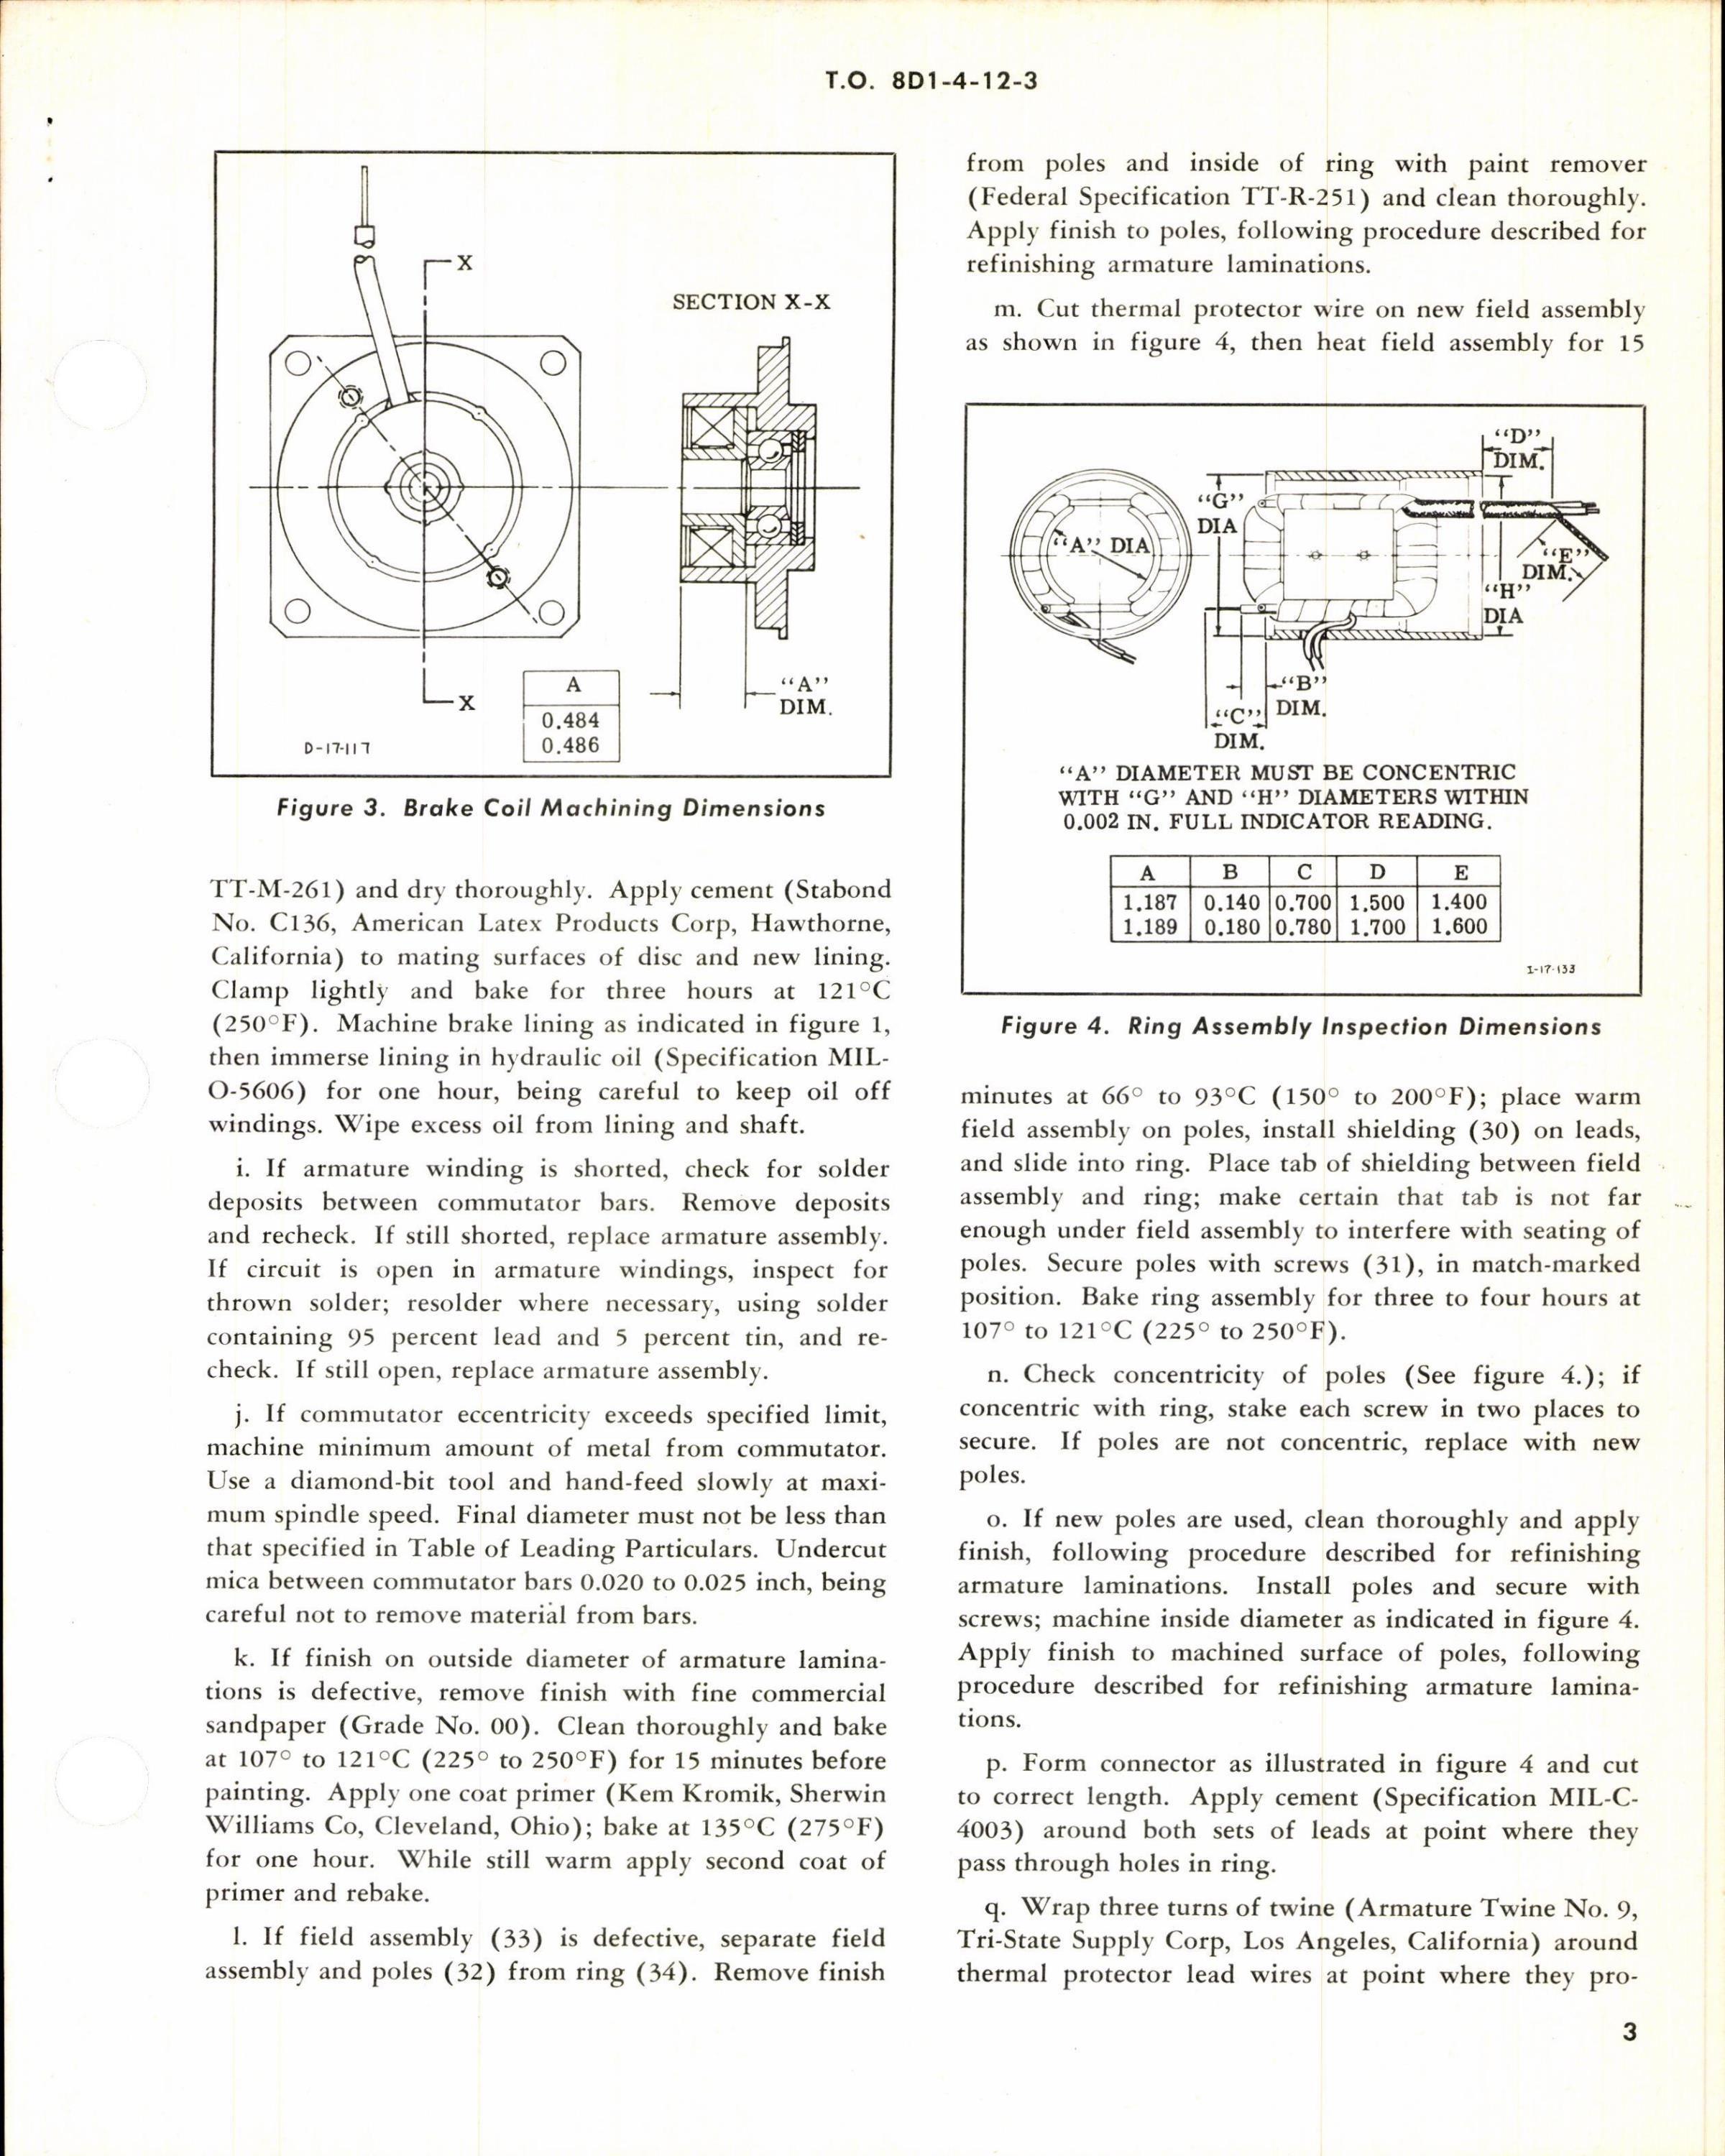 Sample page 3 from AirCorps Library document: Overhaul Instructions with Parts Breakdown for Direct-Current Motor Model DCM20-23, Part No 32409